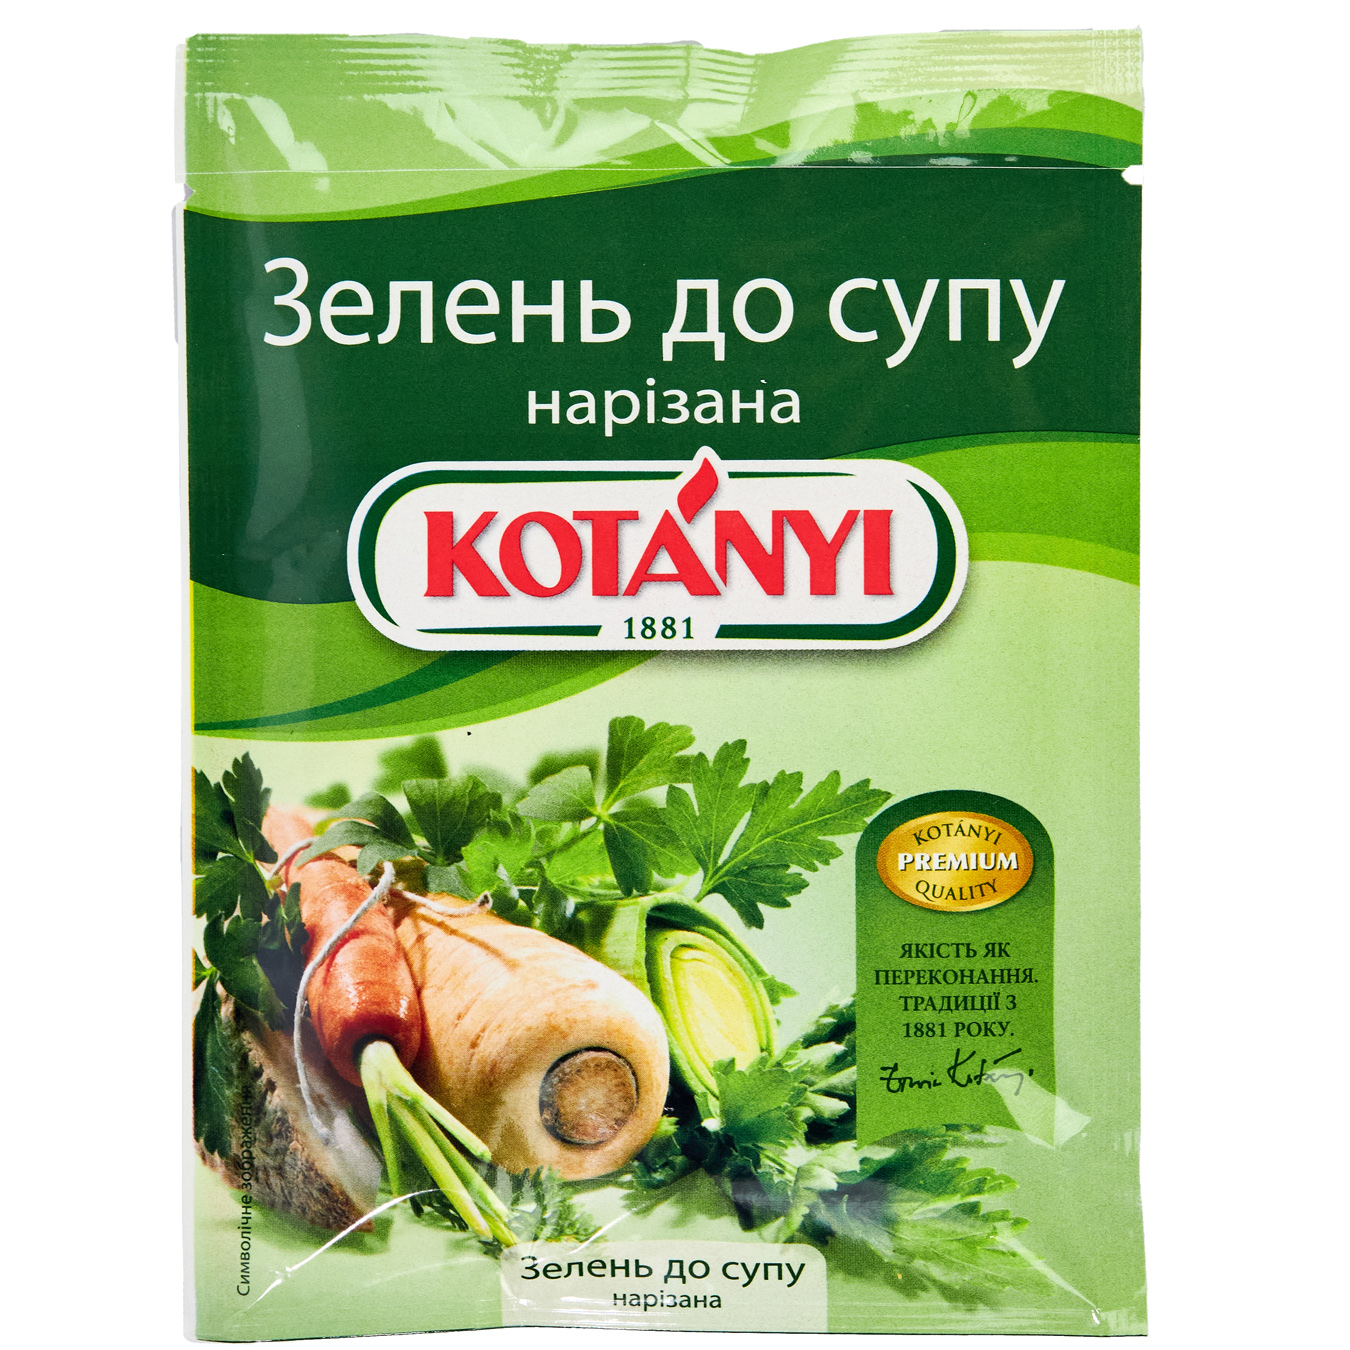 Kotanyi for soup dry spices 18g